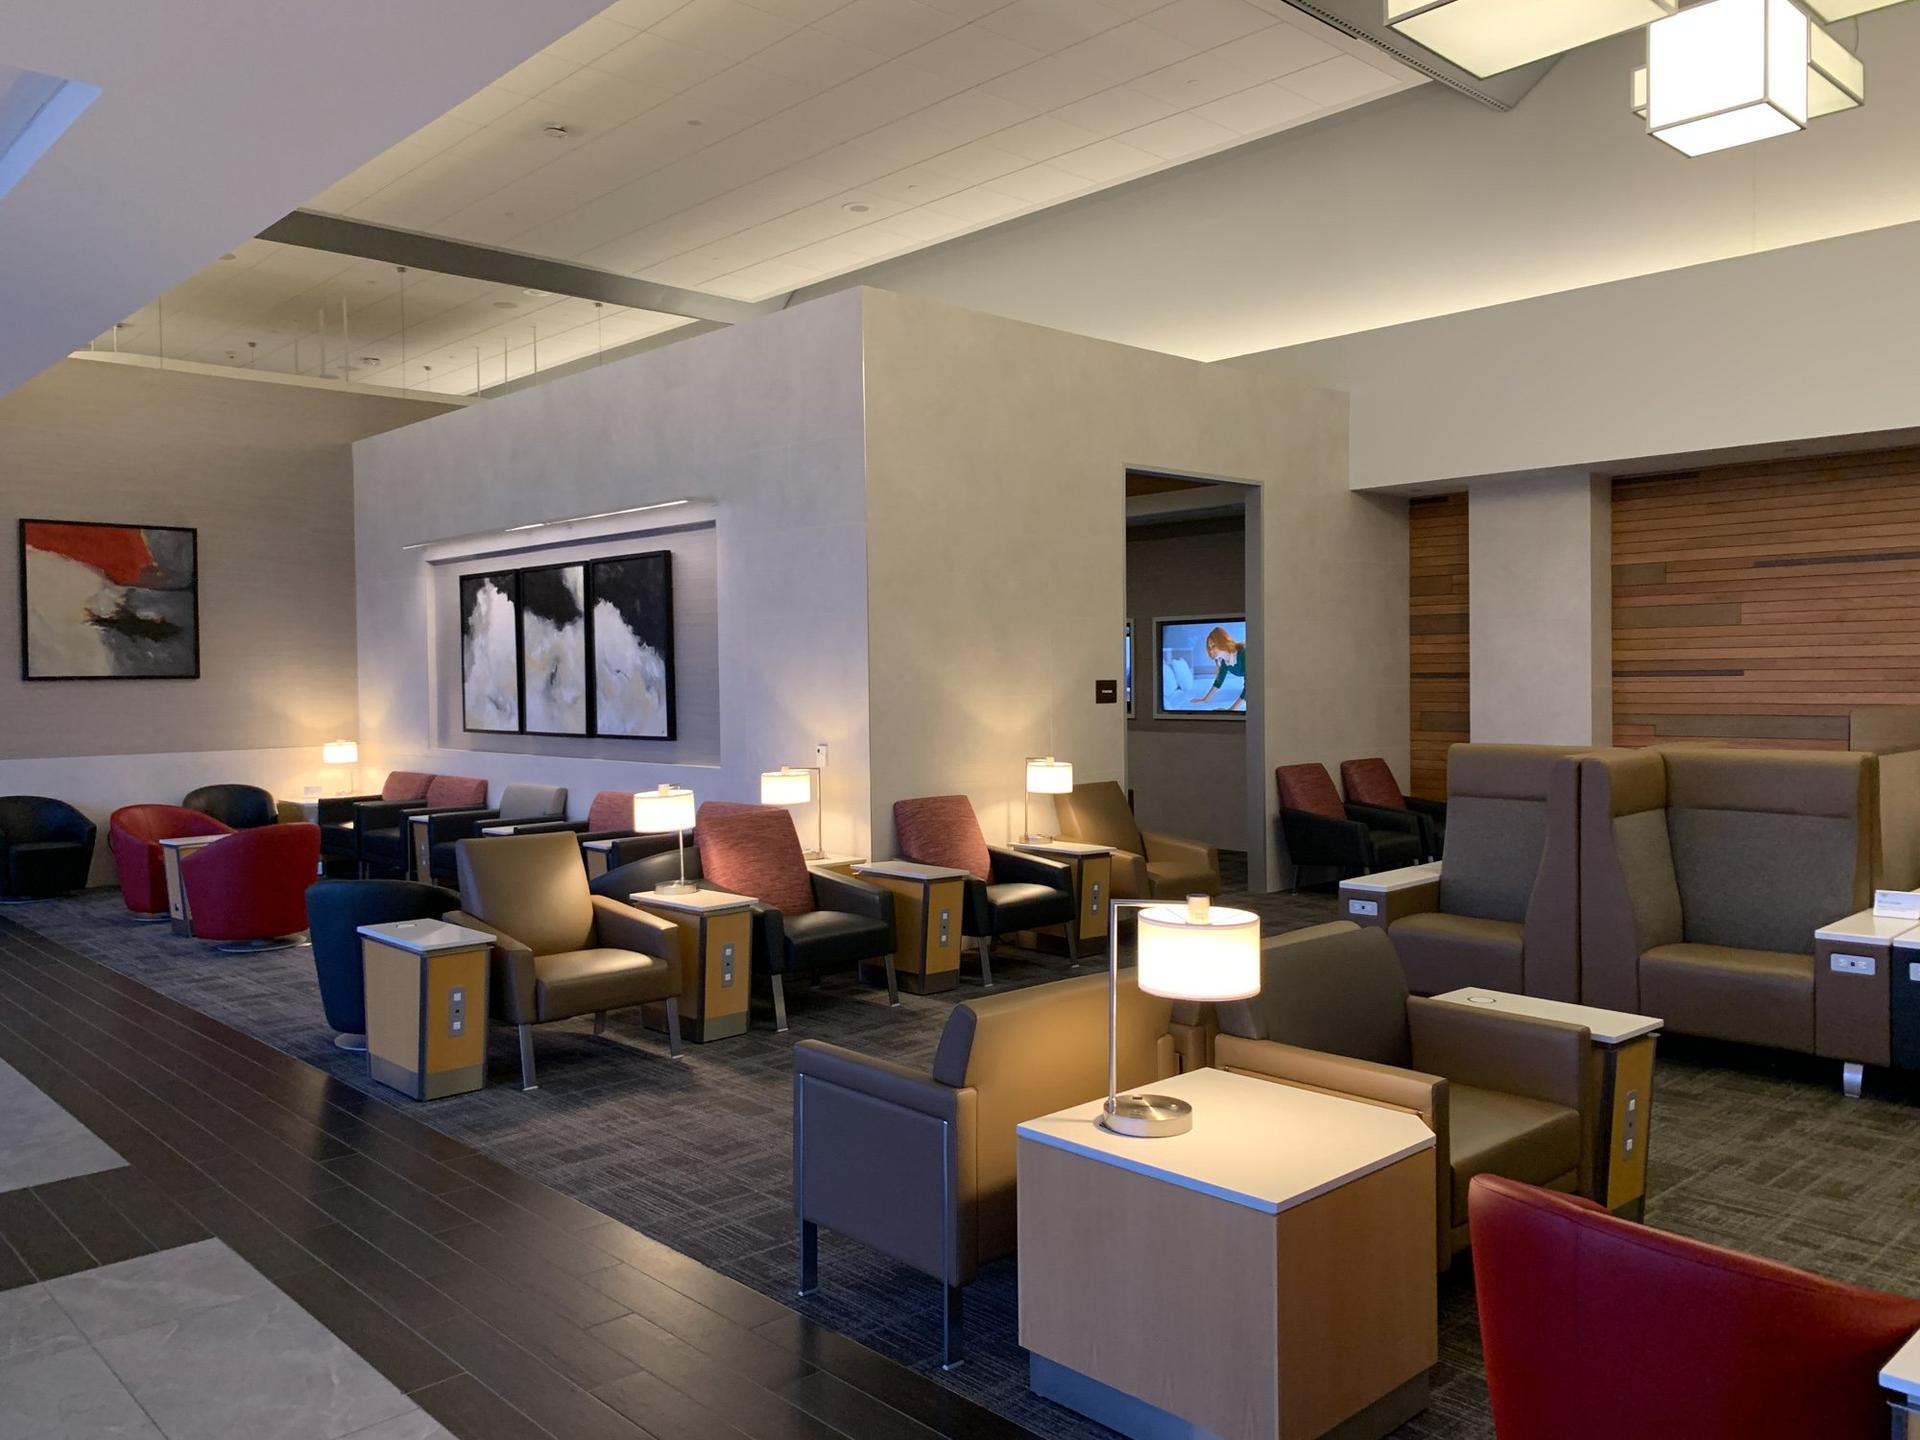 American Airlines Flagship Lounge image 42 of 55